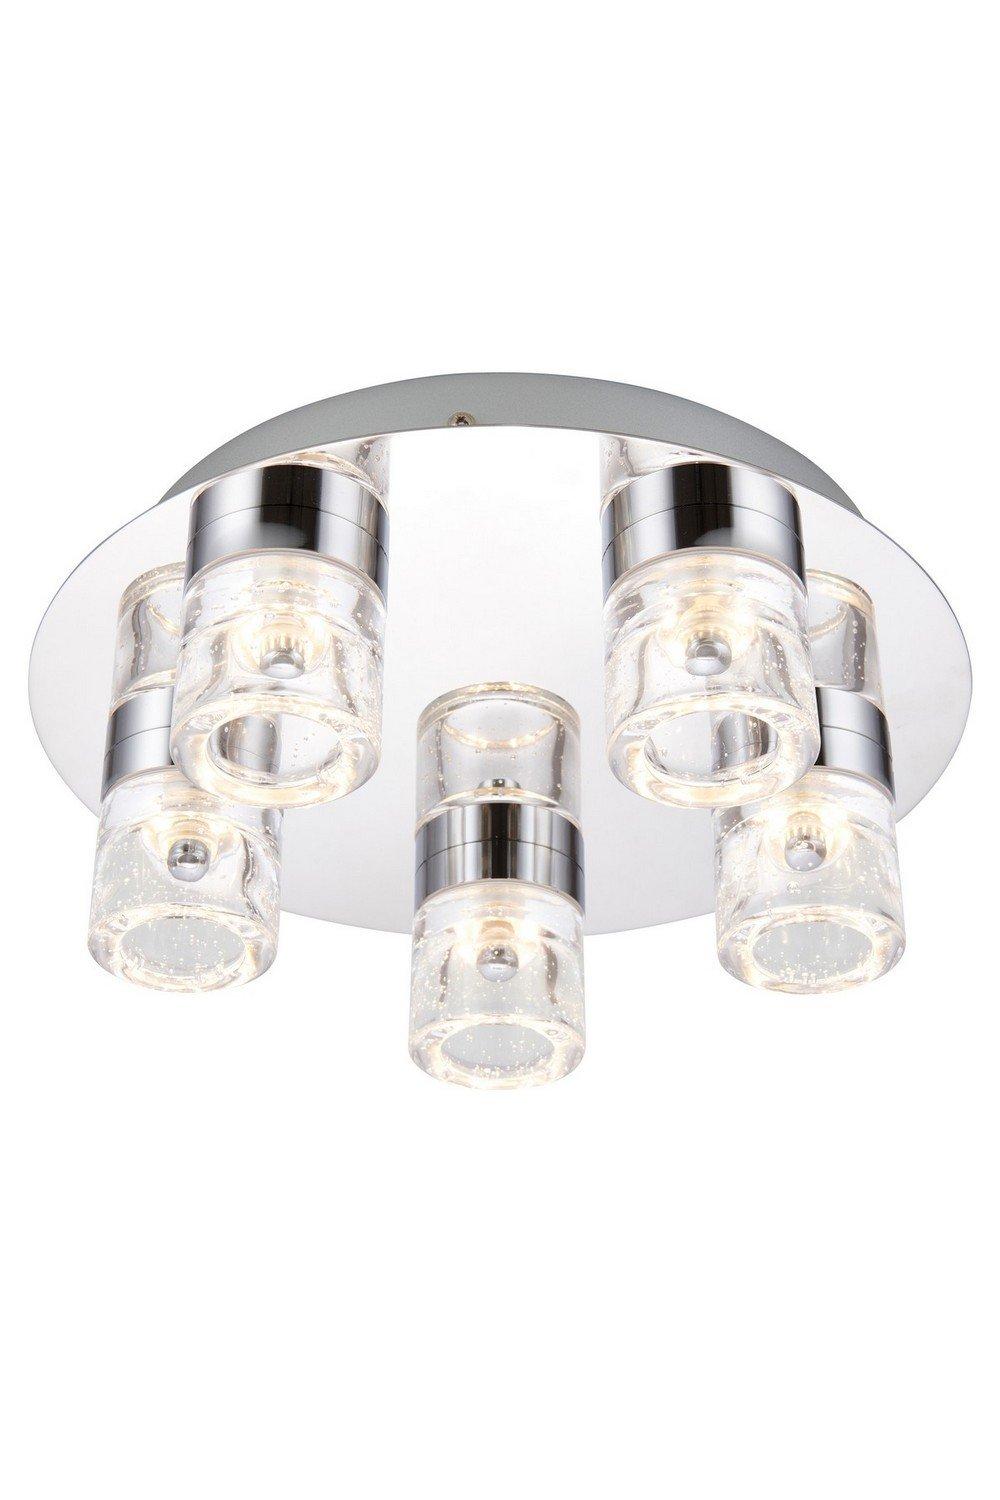 Imperial 5 Light Bathroom Flush Ceiling Light Chrome Clear Glass with Bubbles IP44